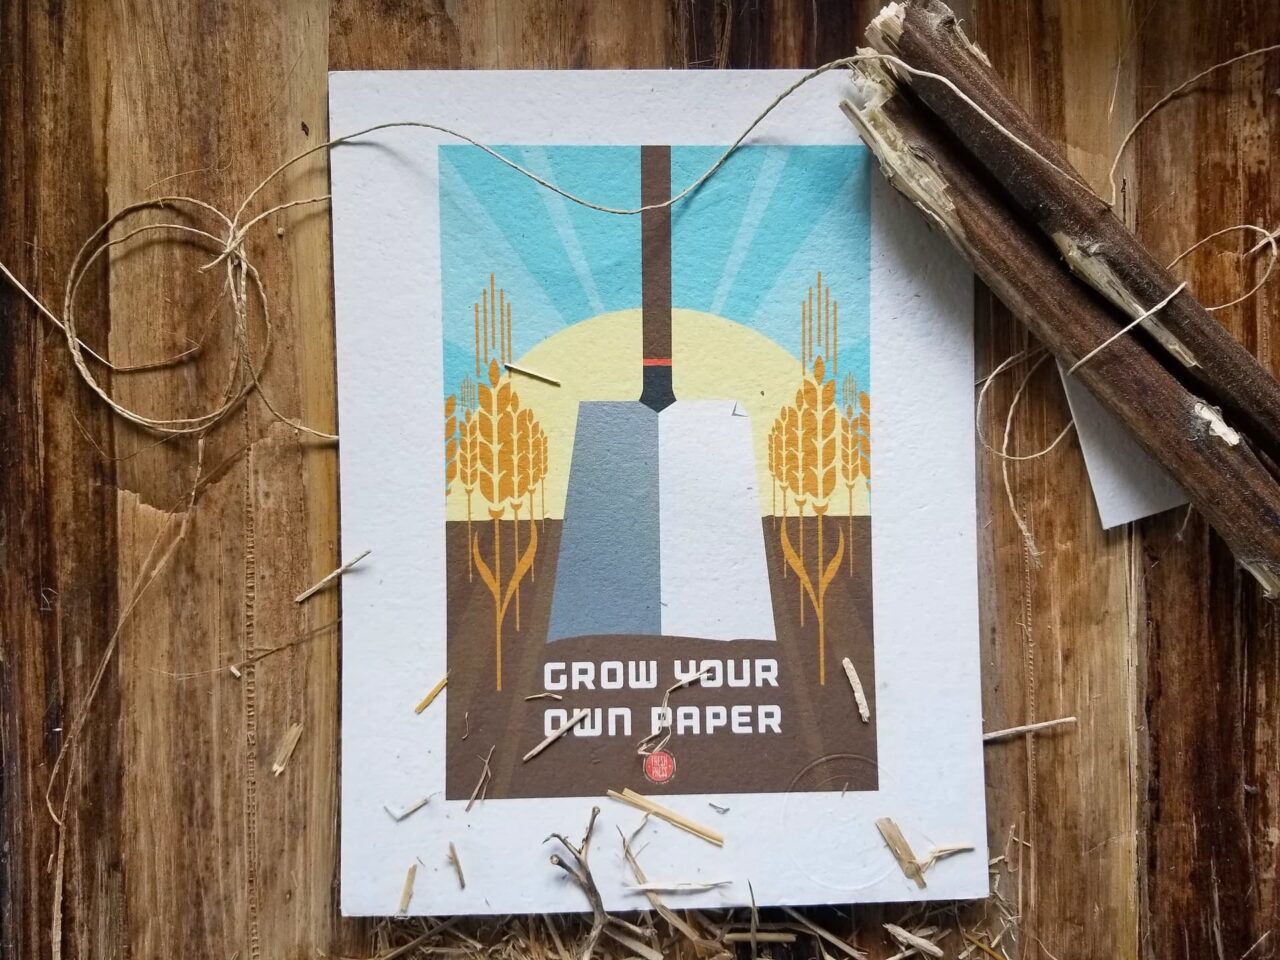 “Grow Your Own Paper” poster by Eric Benson. Inspired by WPA posters from the Federal Art Project (1935–1943).